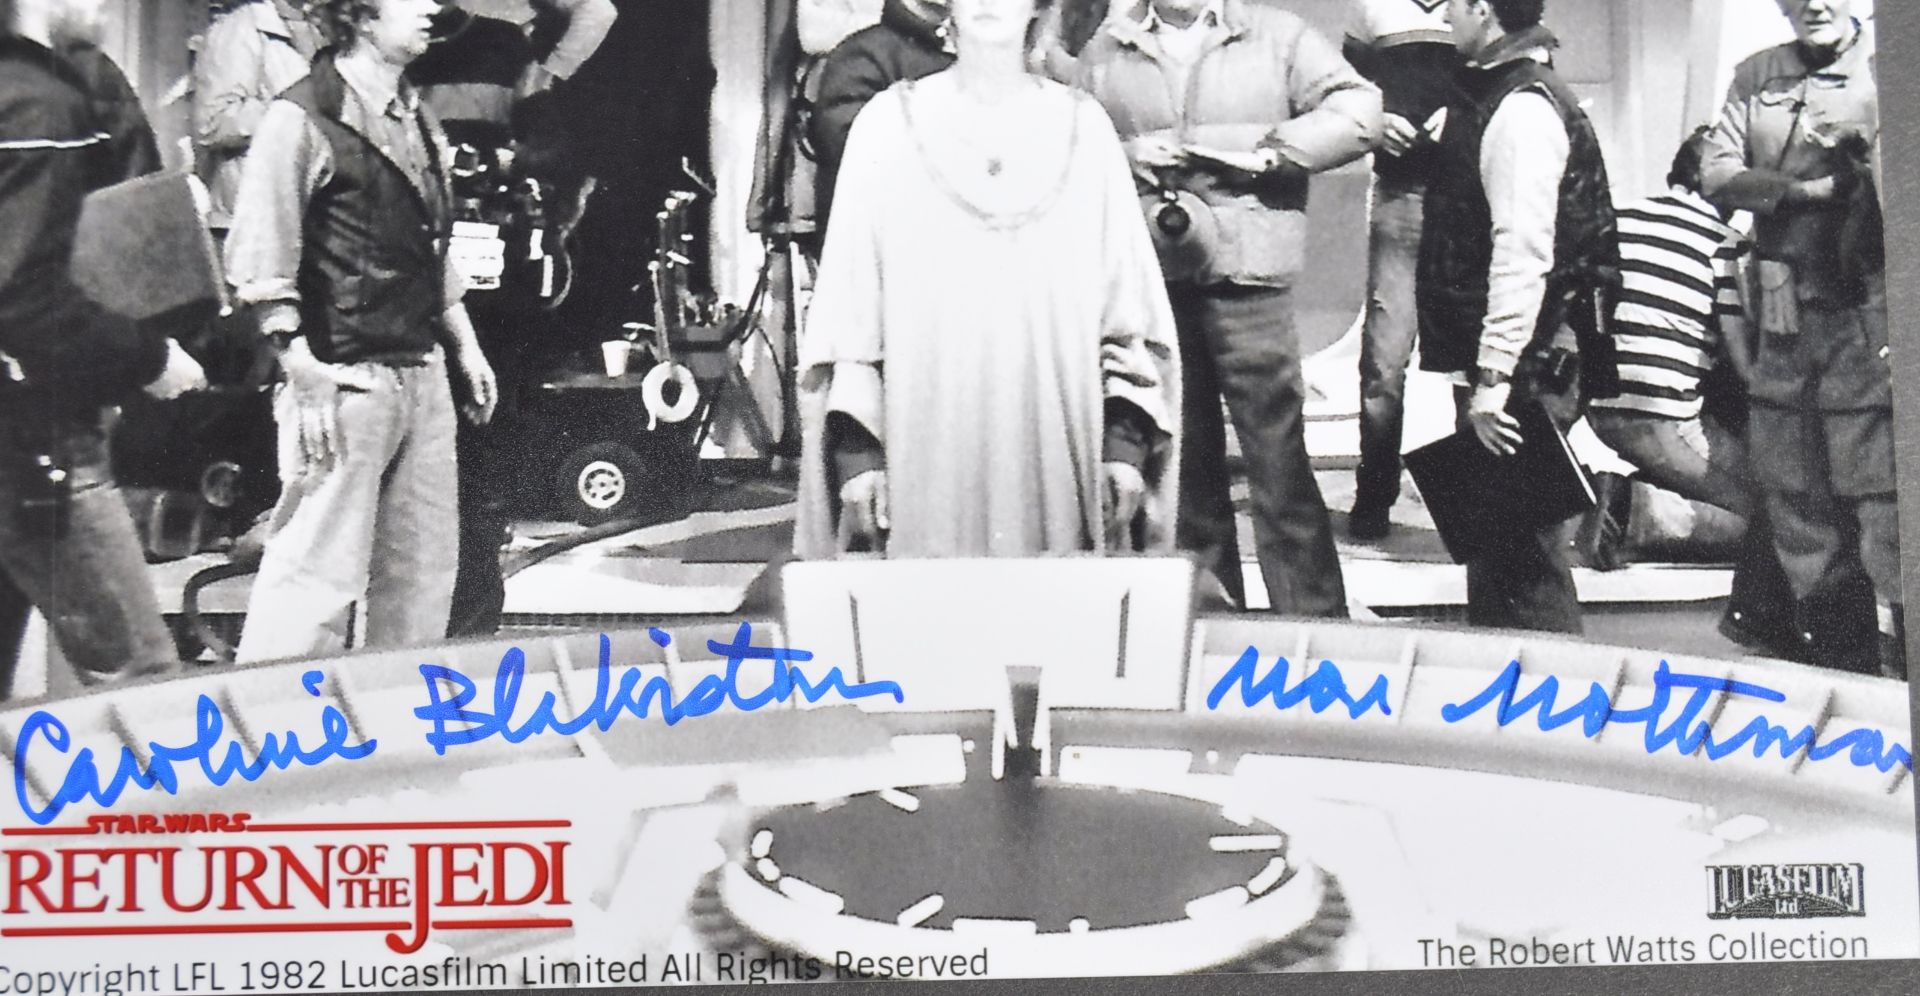 STAR WARS - ROBERT WATTS COLLECTION - DUAL SIGNED PHOTOGRAPH - Image 3 of 3